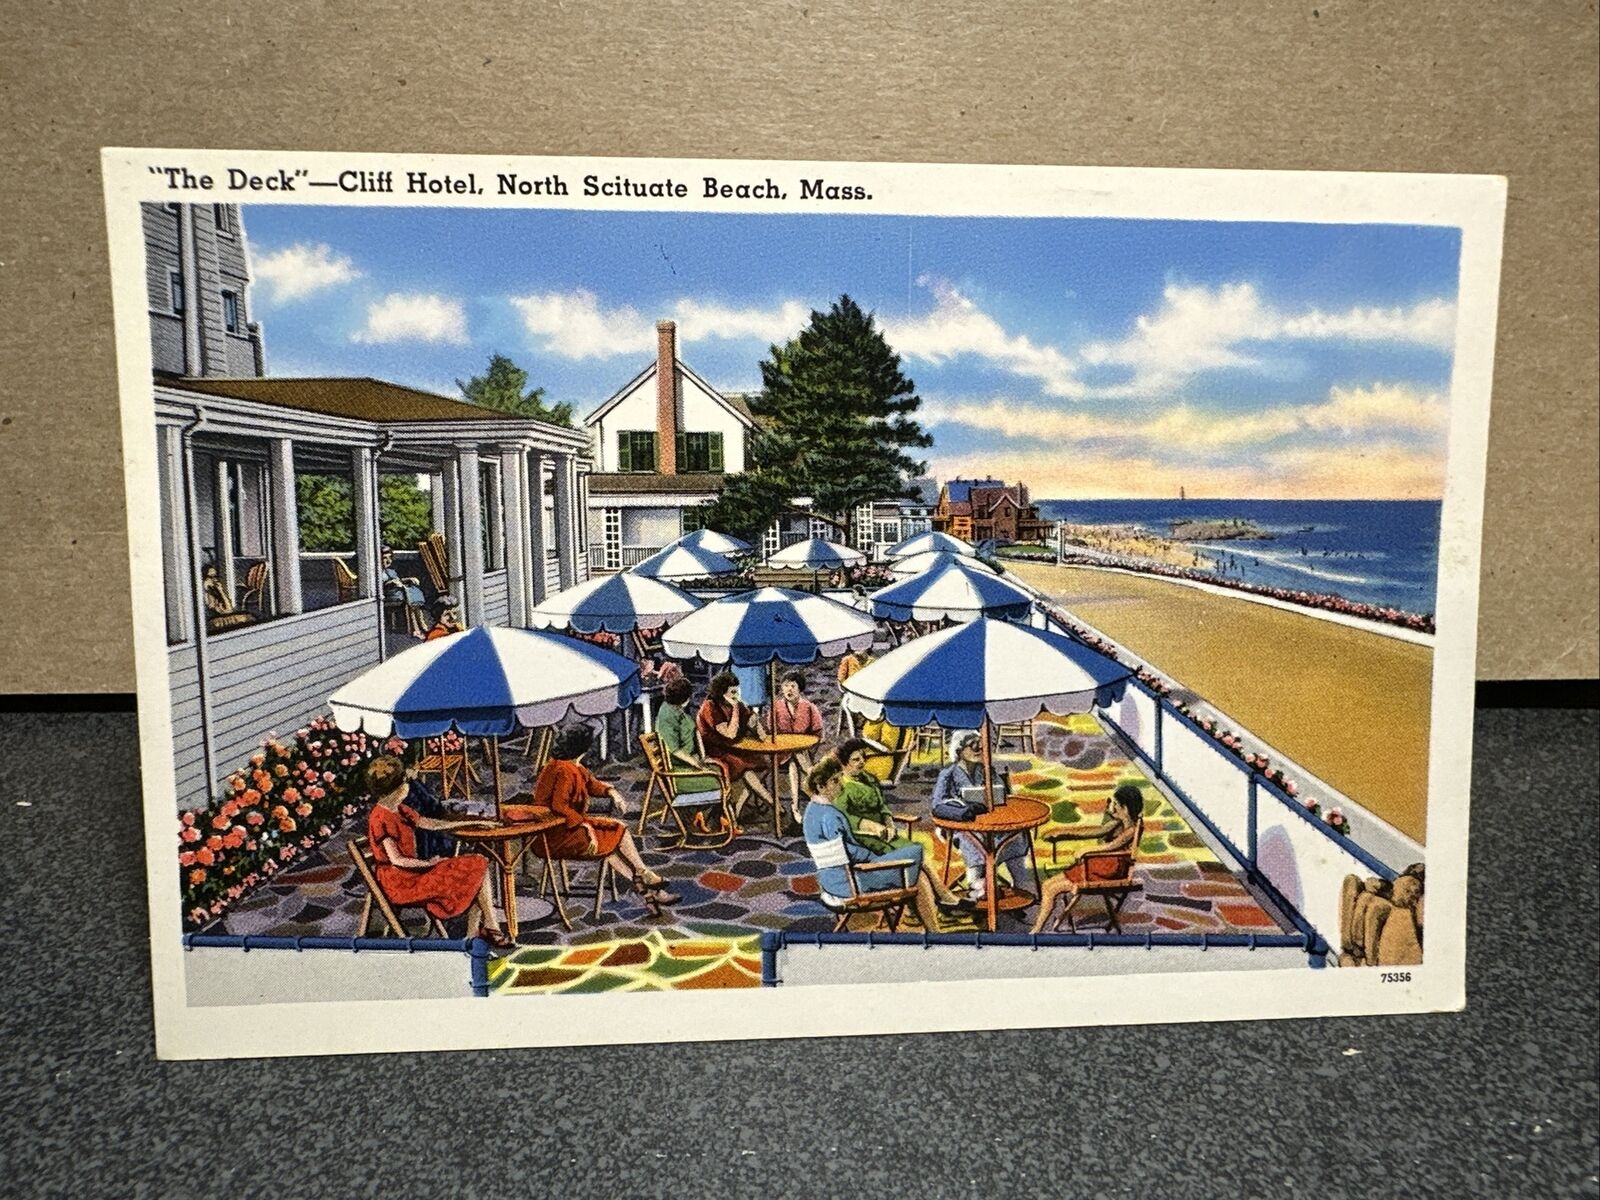 The Deck At Cliff Hotel North Scituate Beach, Massachusetts Postcard ￼